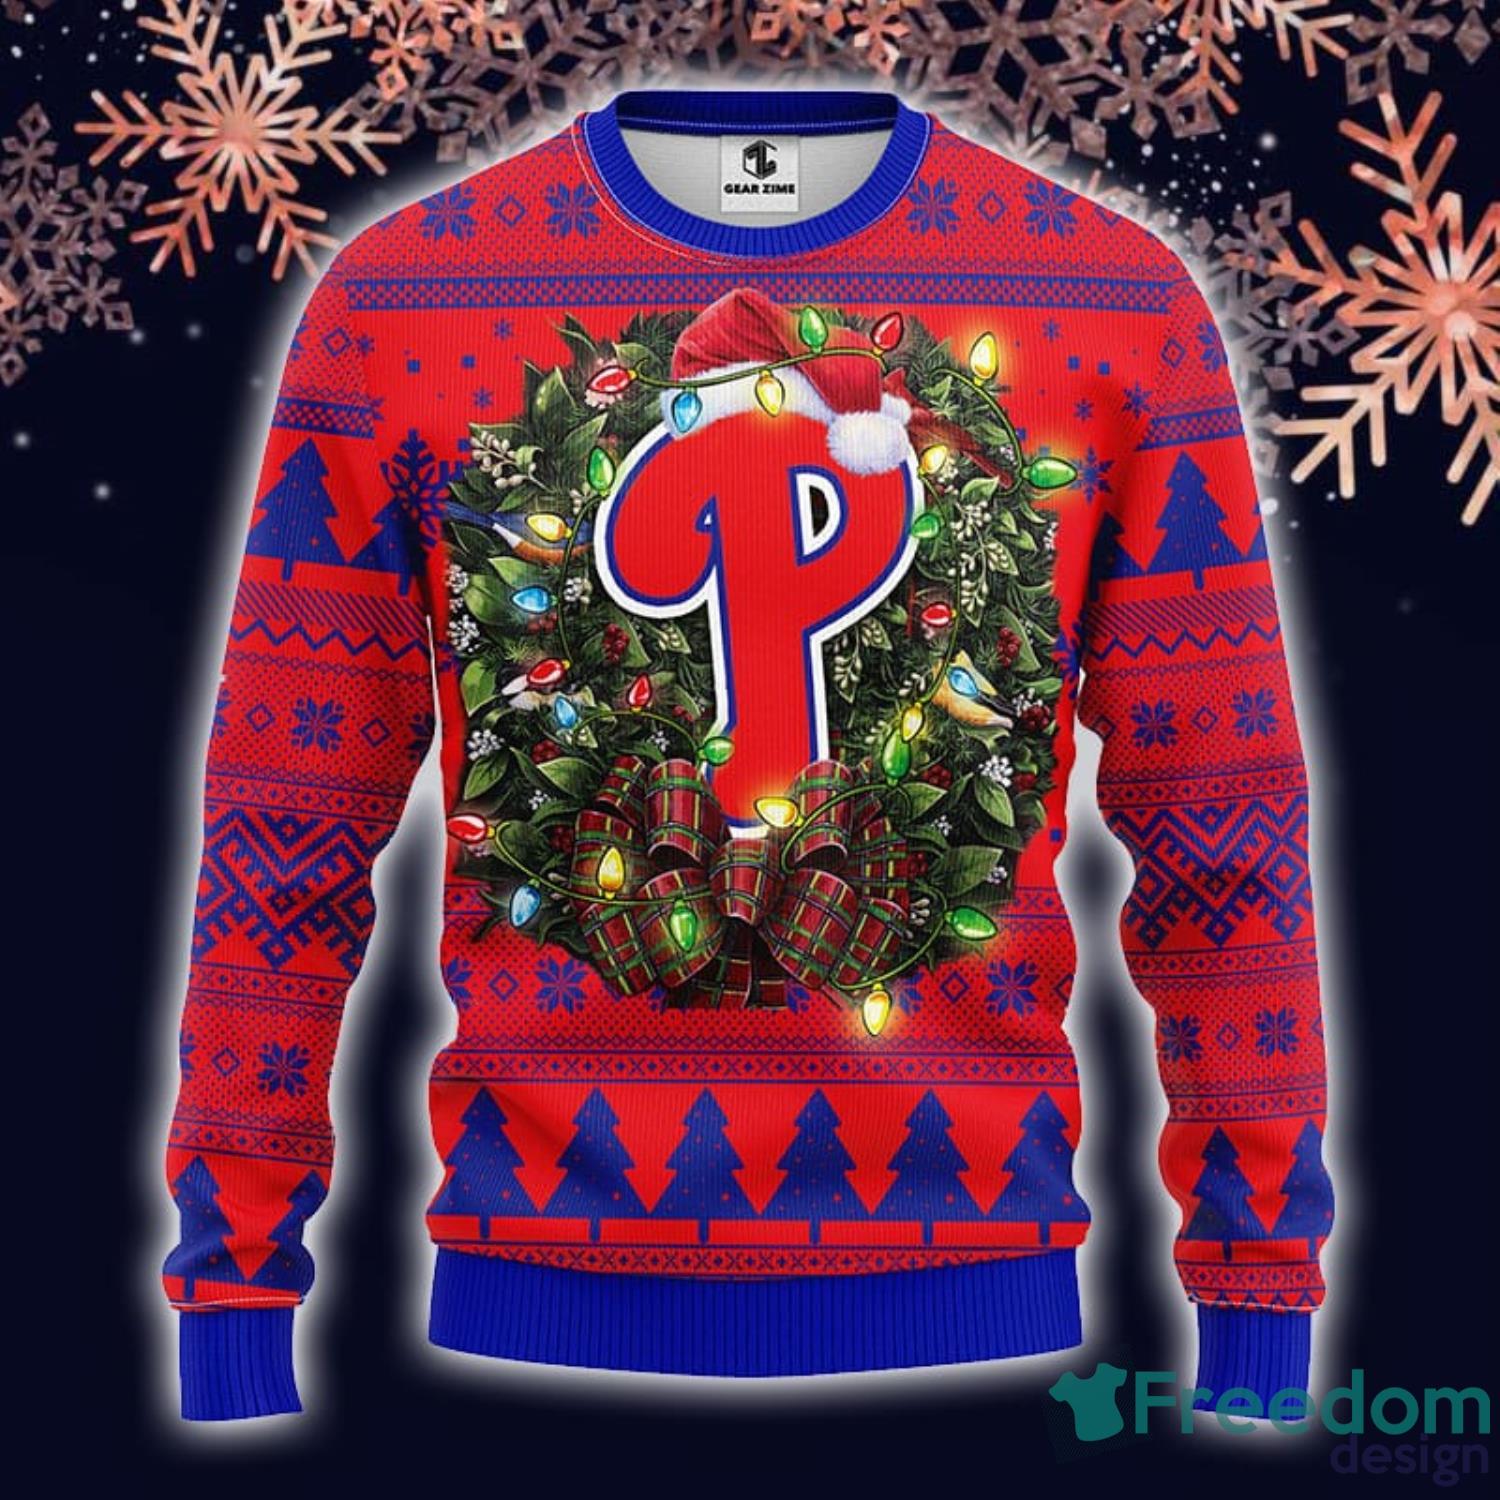 The hottest MLB 2023 gear for Phillies fans 